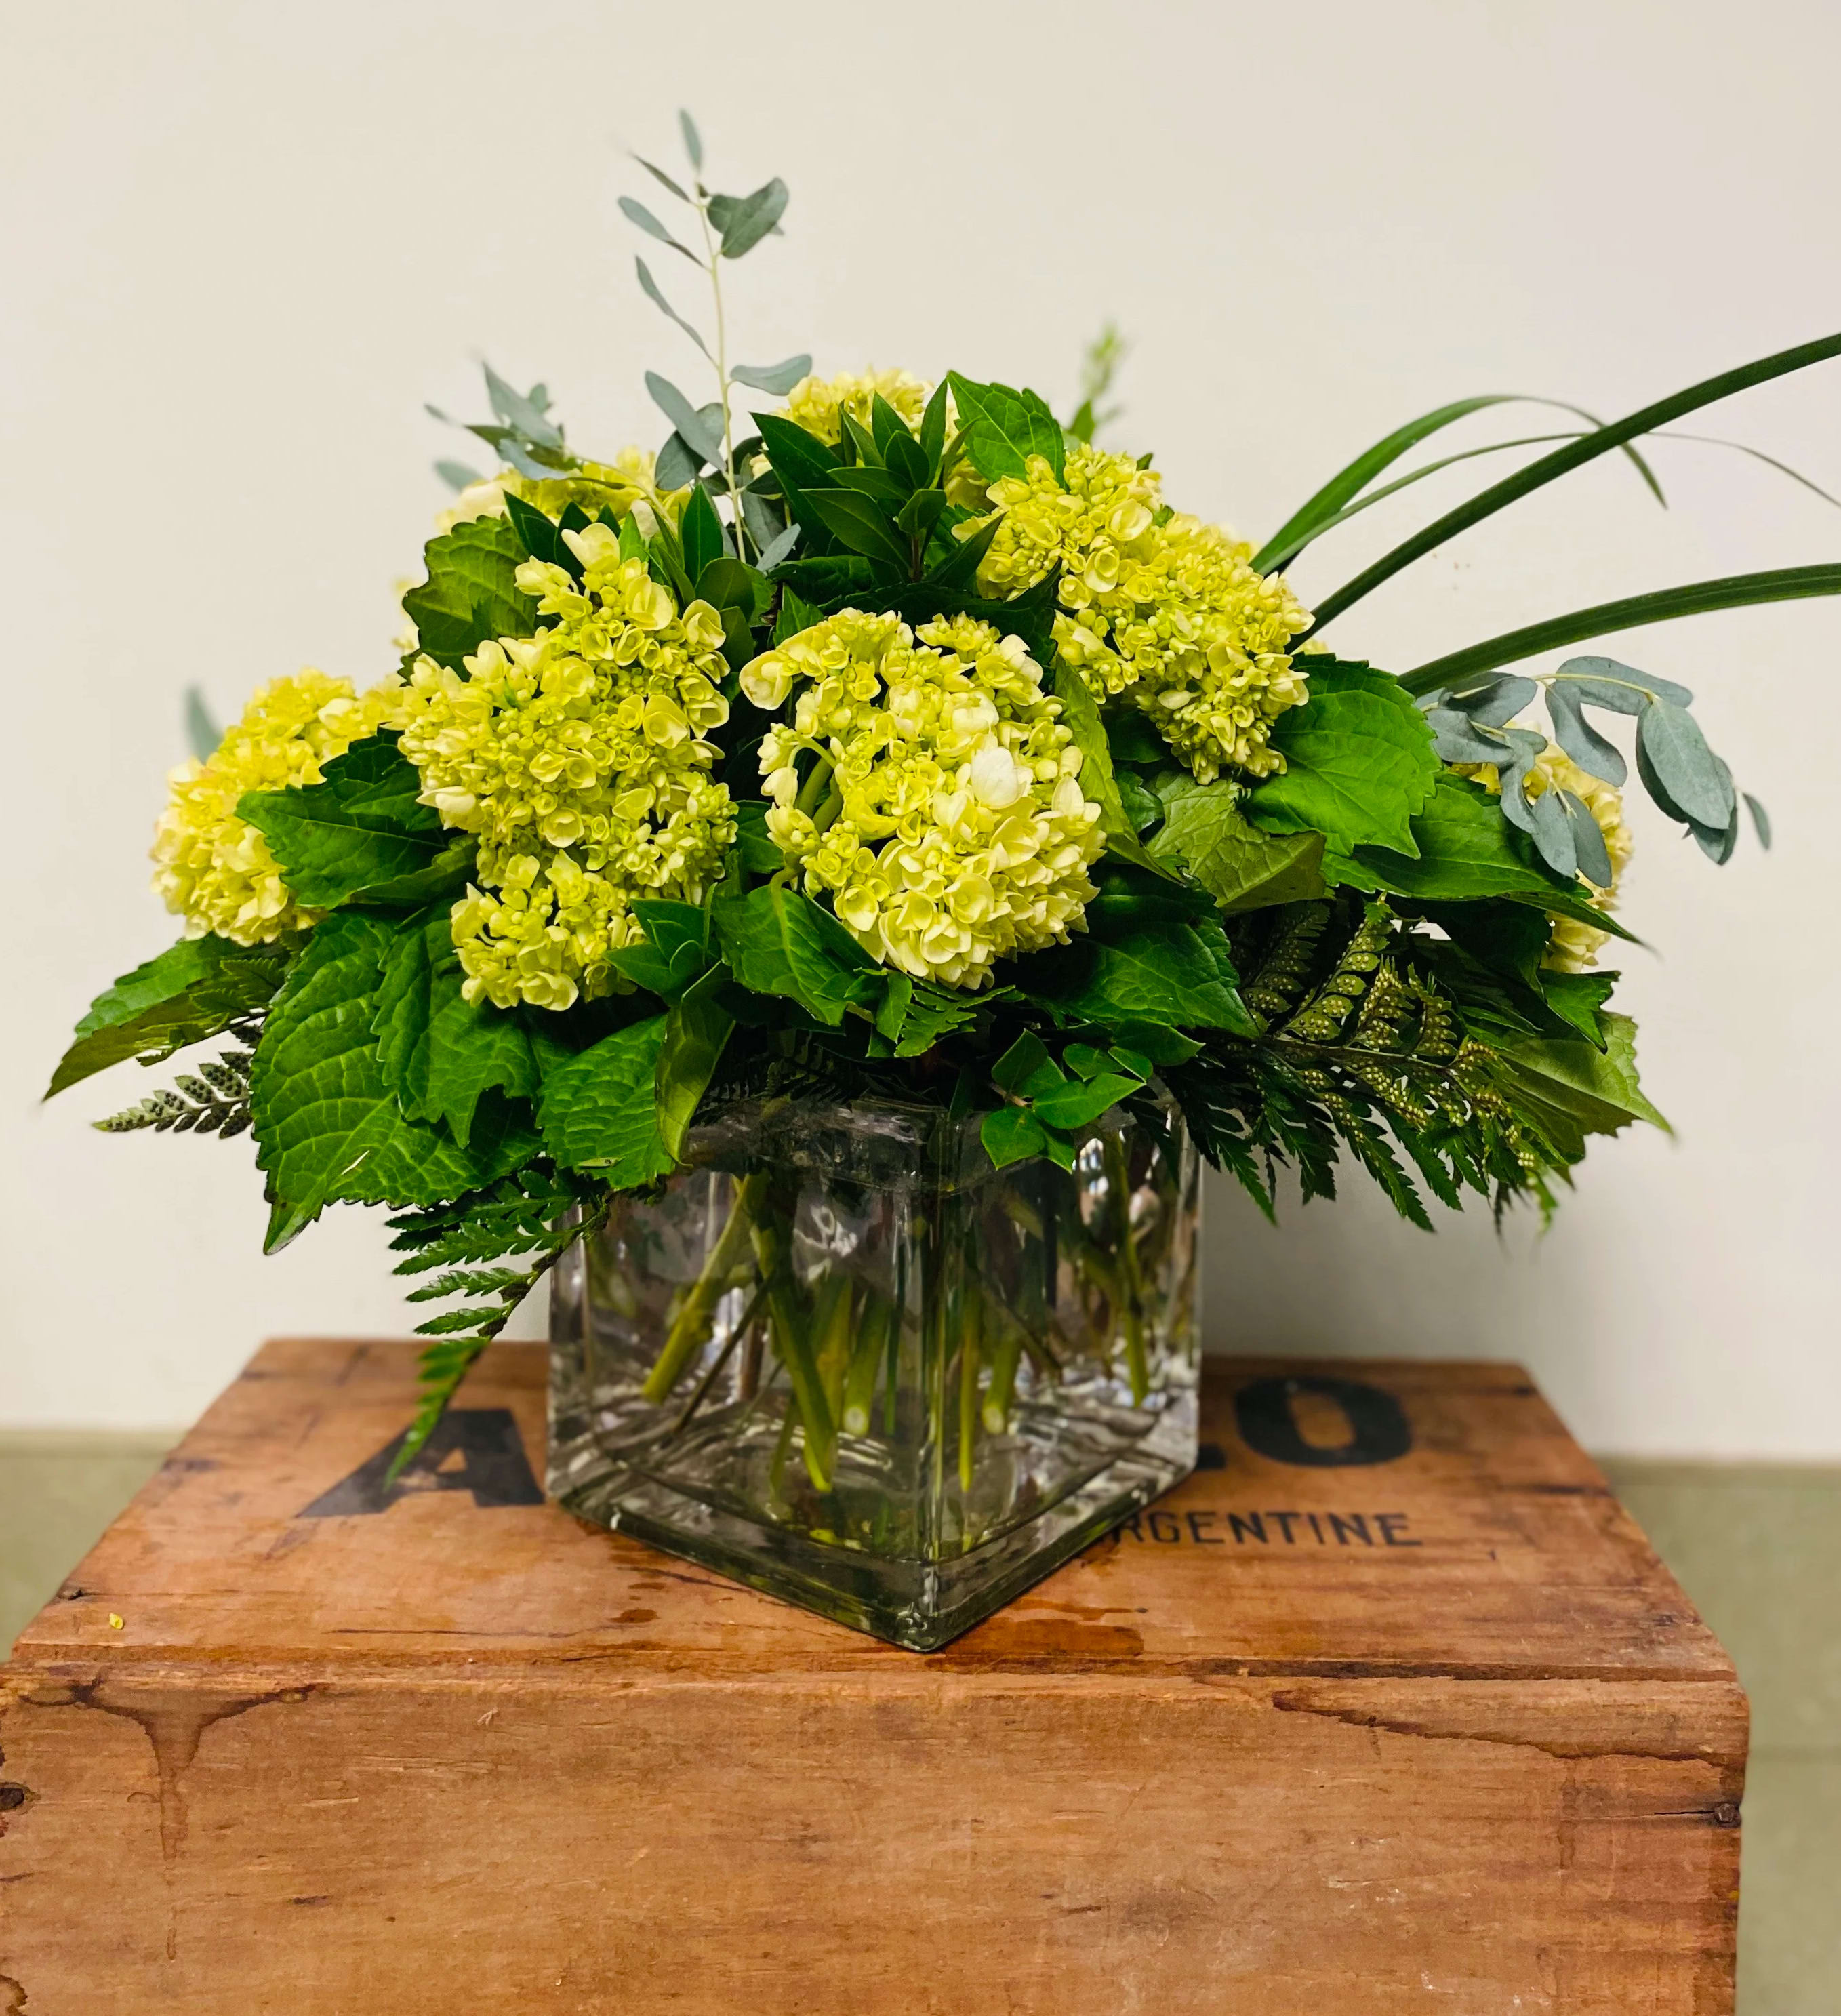 Nothing Short of Perfect Bouquet - Our best Colombian Mini Green Hydrangea are expertly arranged in a clear glass cube with lush, tropical foliage to make this arrangement nothing short of PERFECT!